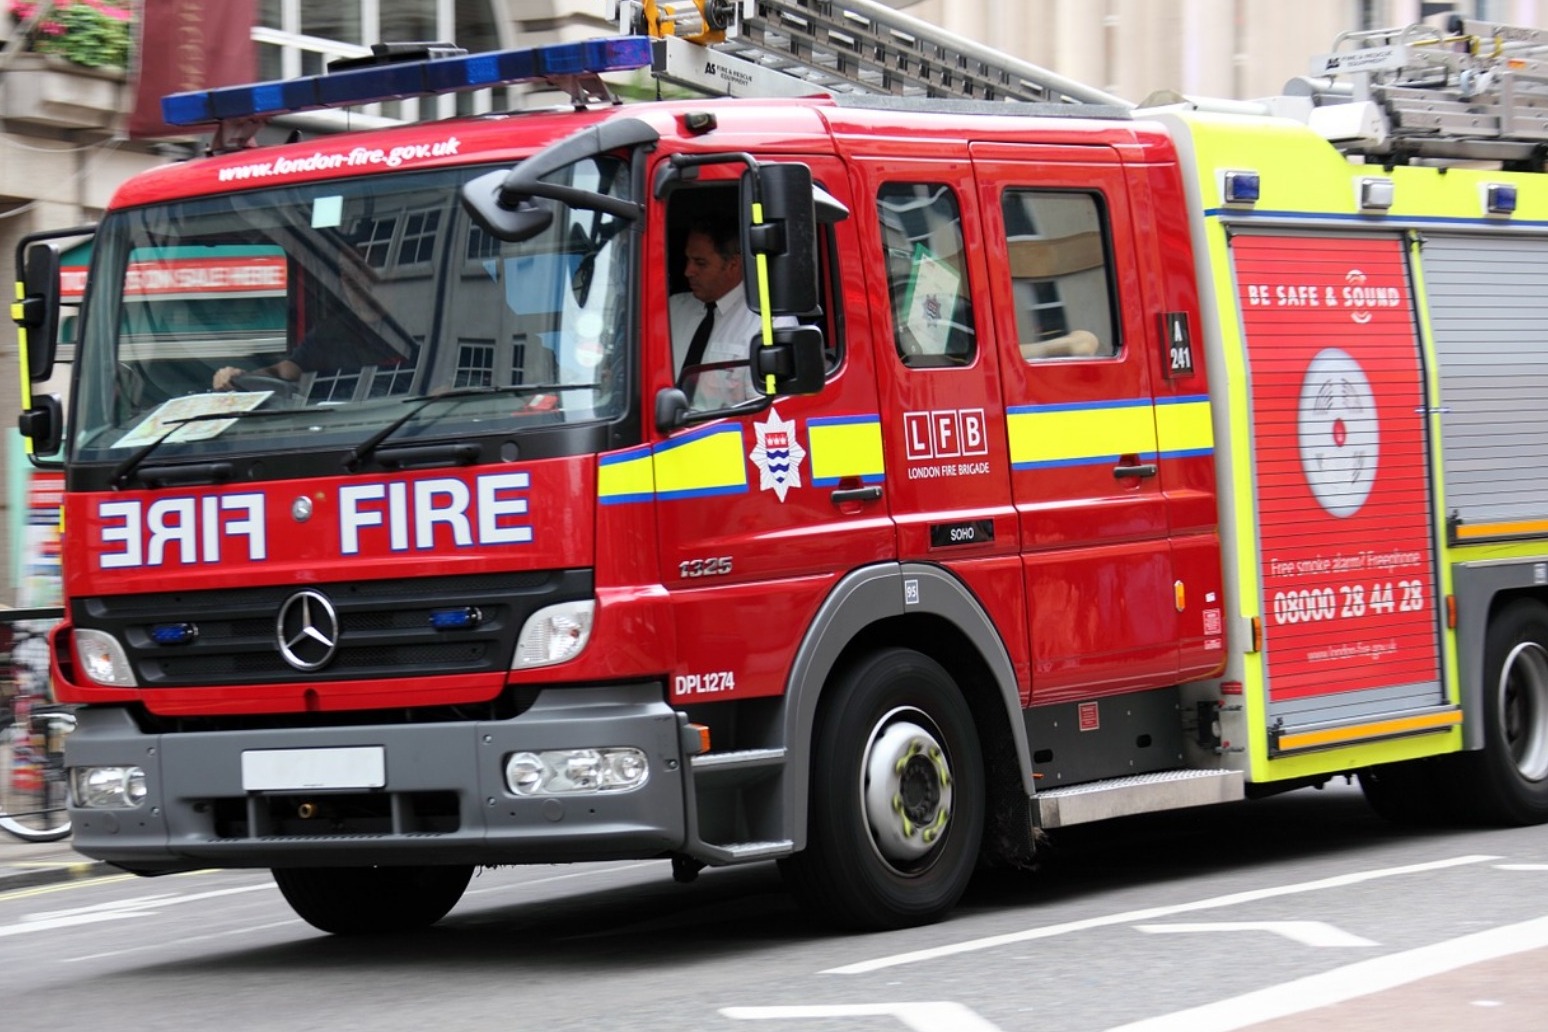 A woman dies after house fire in London 